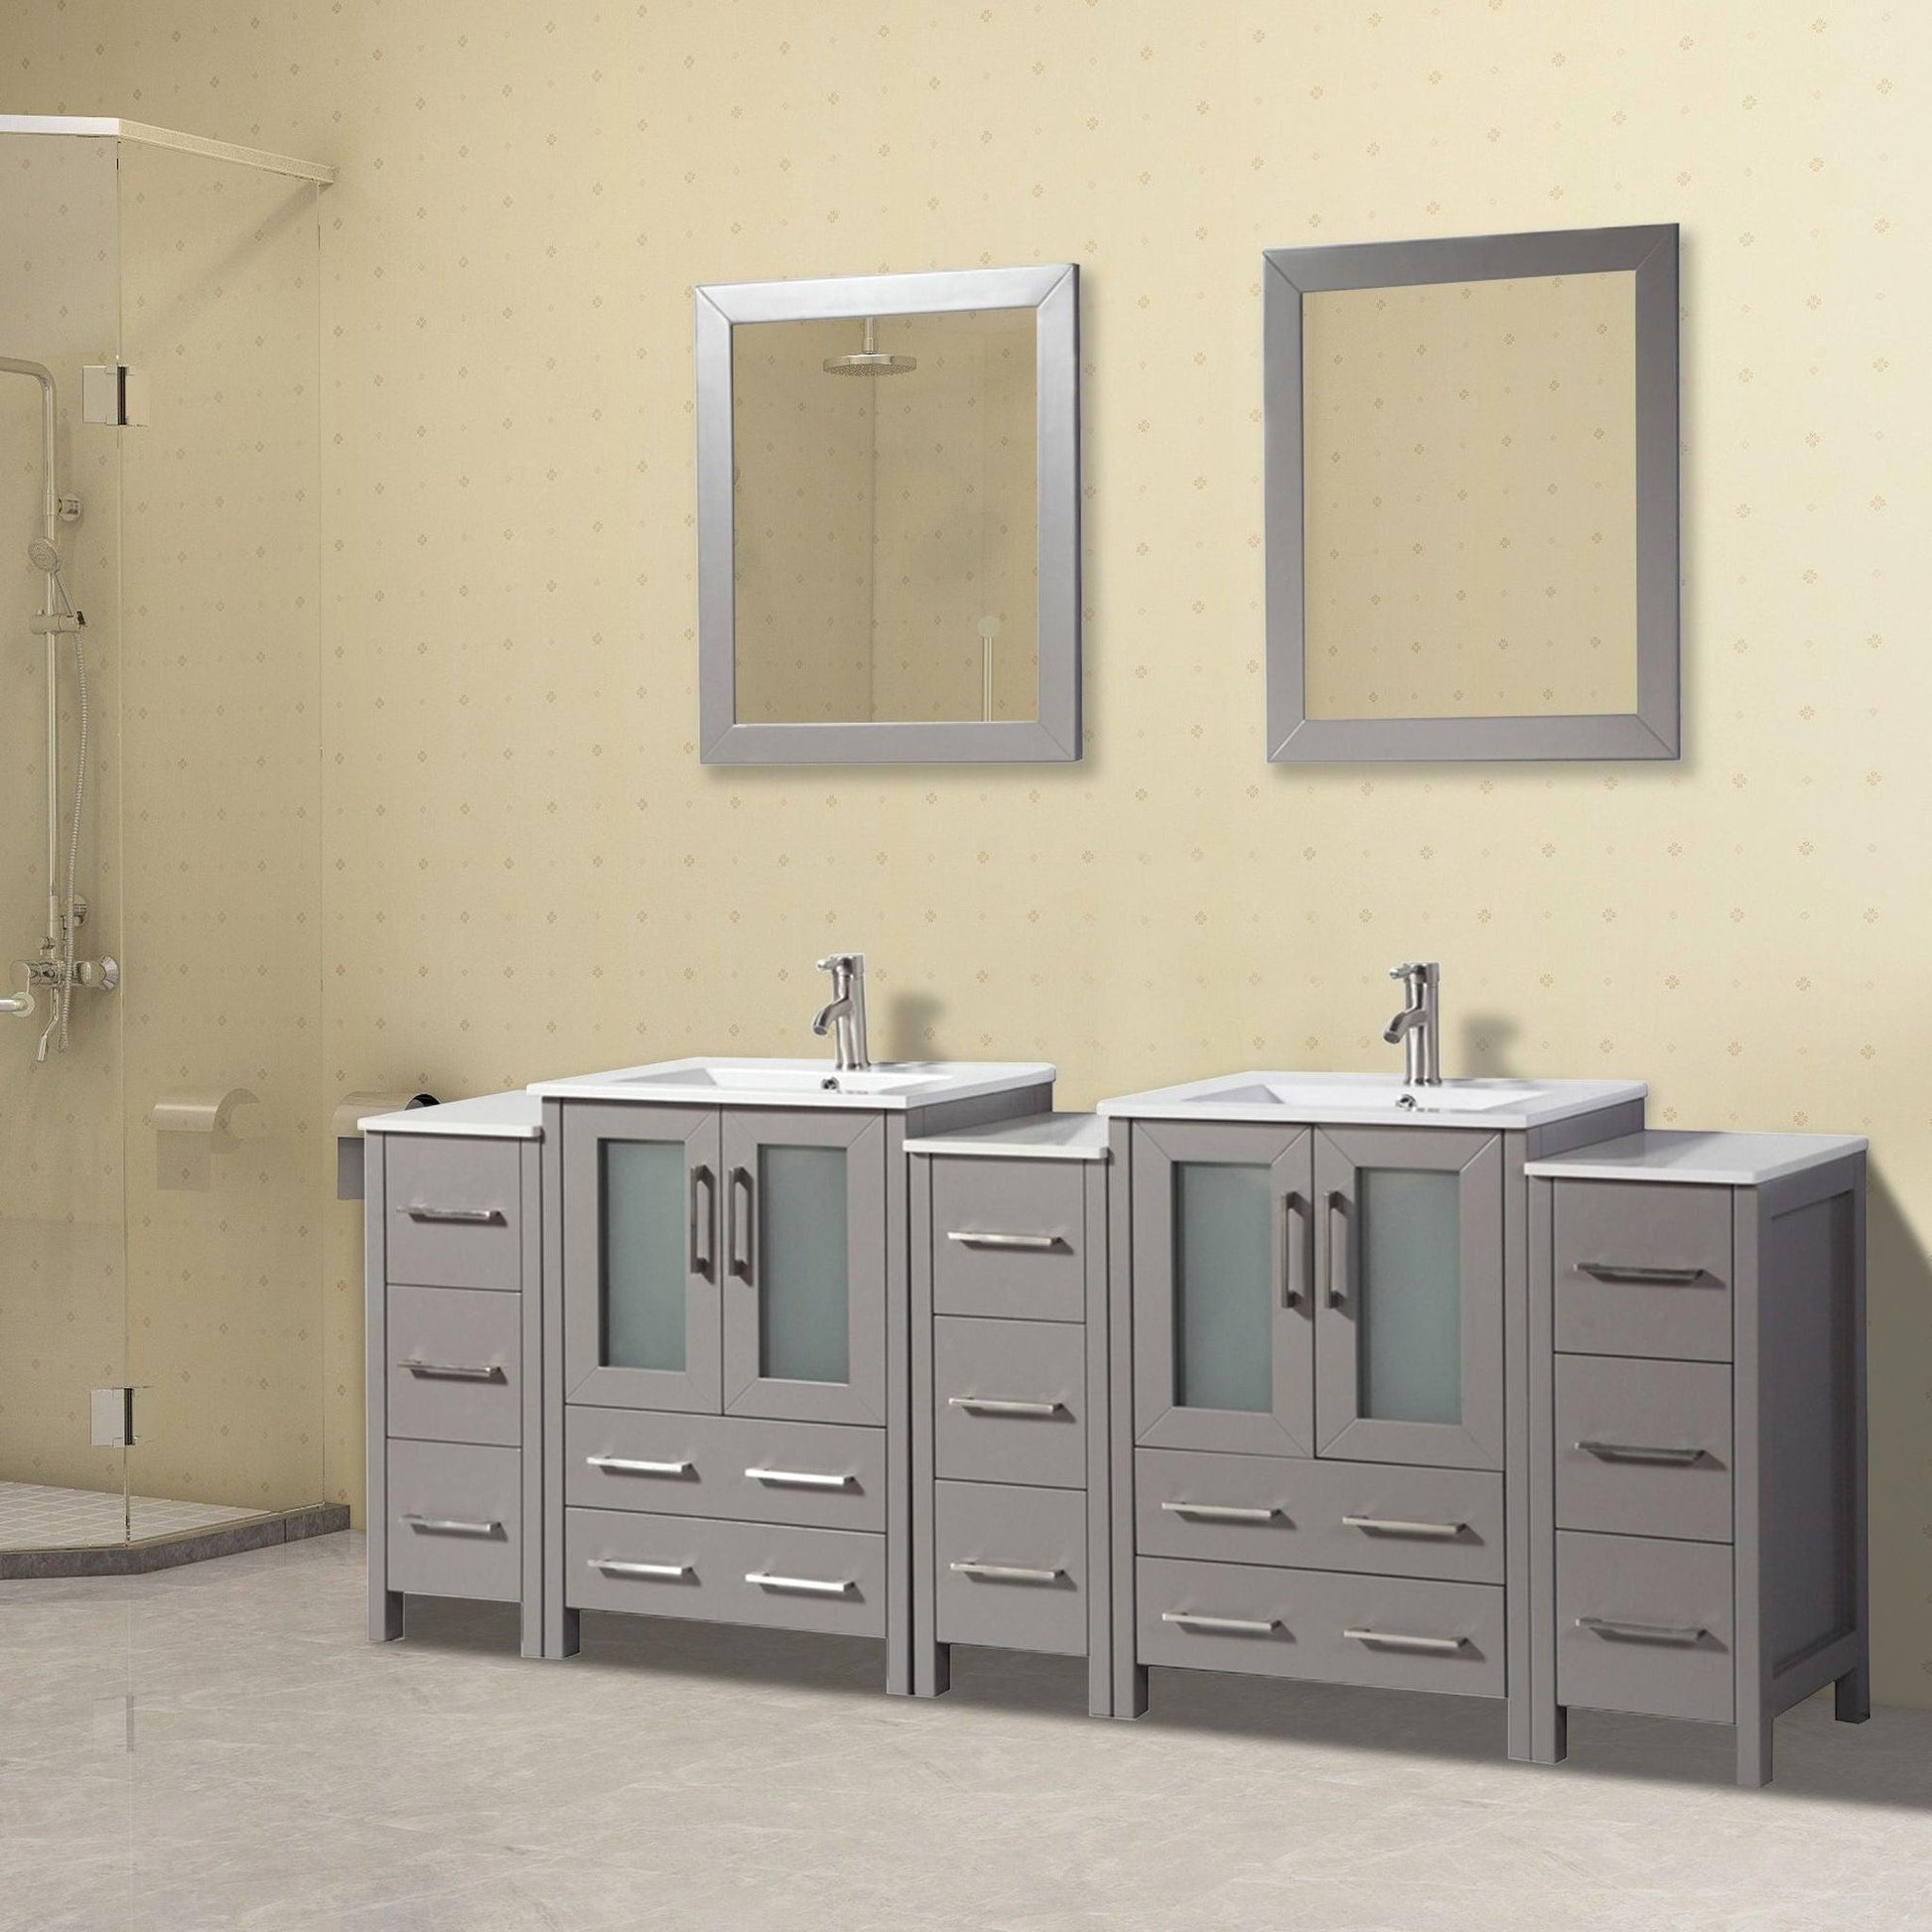 Vanity Art Brescia 84" Double Gray Freestanding Vanity Set With With Integrated Ceramic Sink, 3 Side Cabinets and 2 Mirrors